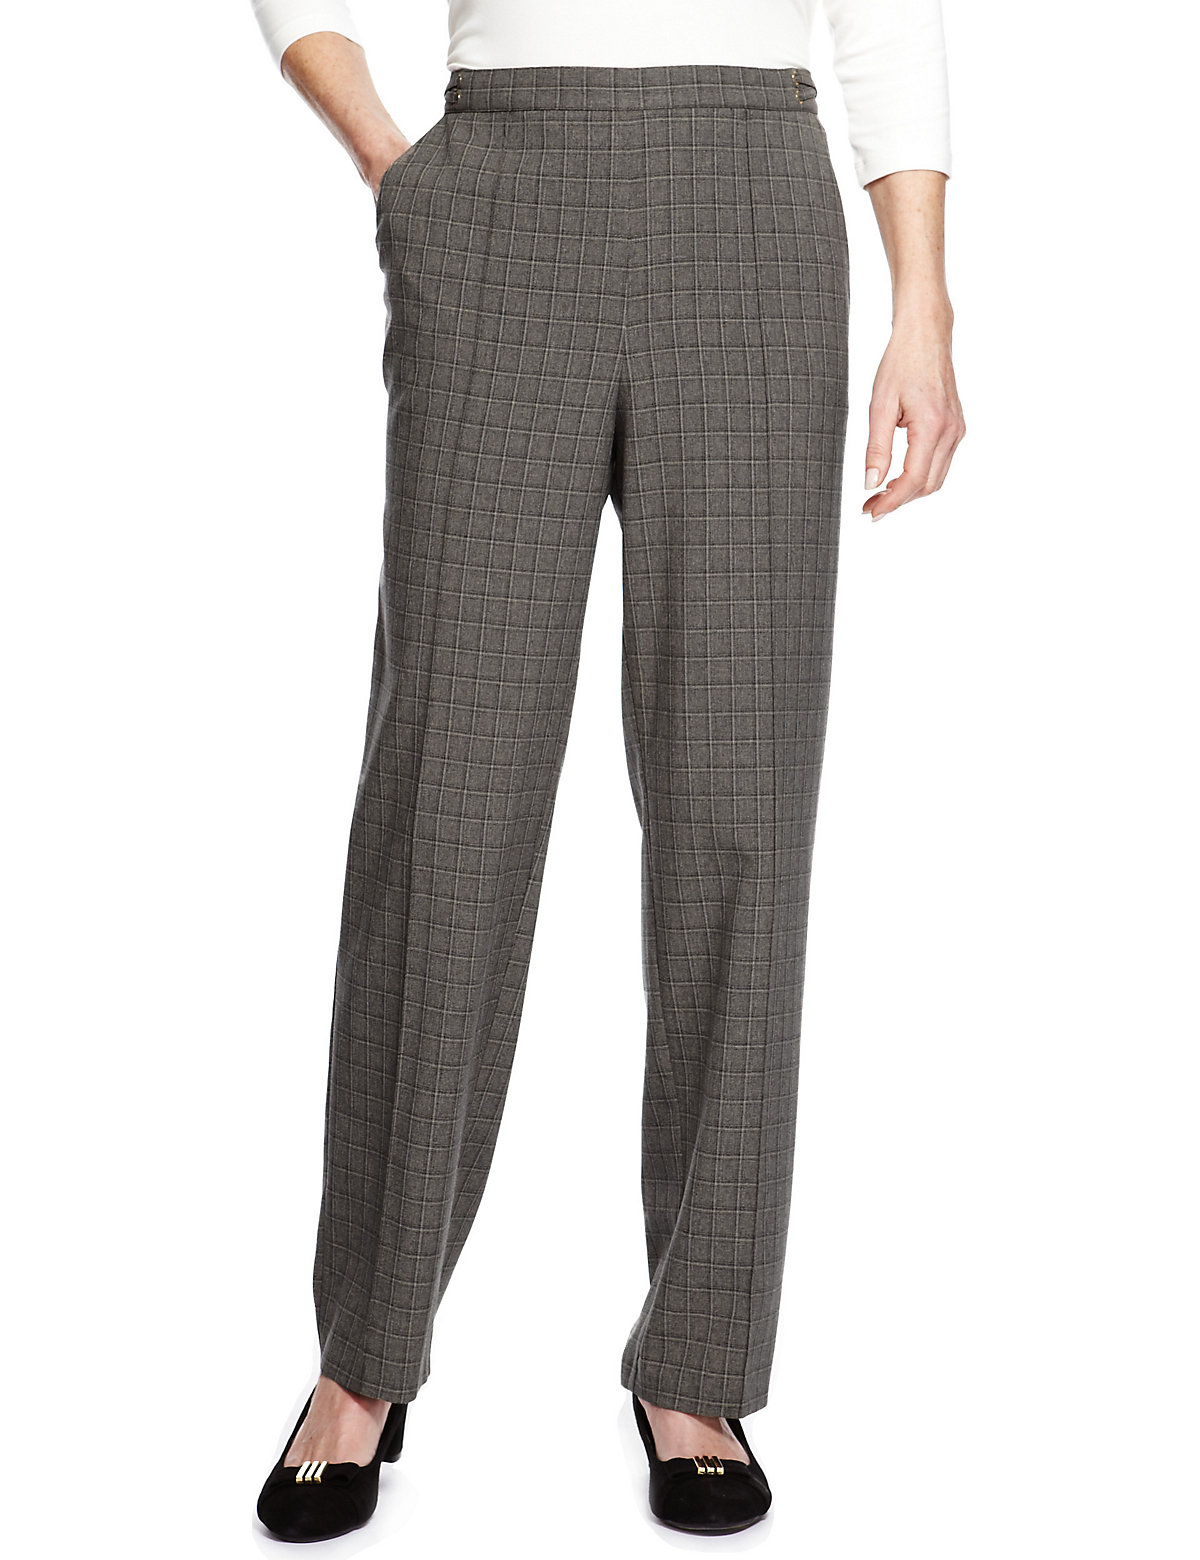 Marks and Spencer - - M&5 MINK Straight Leg Checked Trousers - Size 16 ...